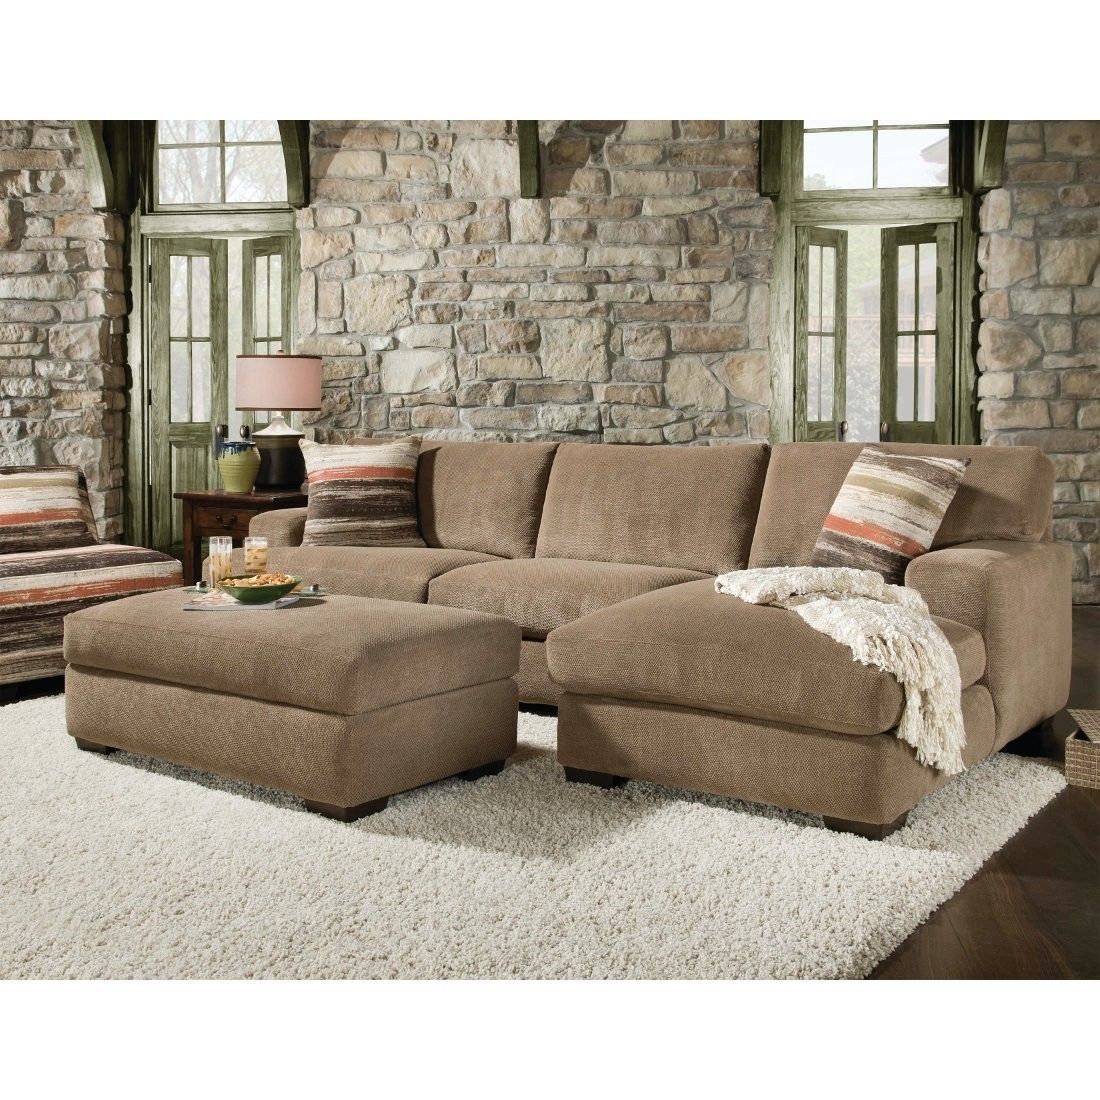 Beautiful Sectional Sofa With Chaise And Ottoman Pictures Regarding Sofas With Chaise And Ottoman (Photo 1 of 10)